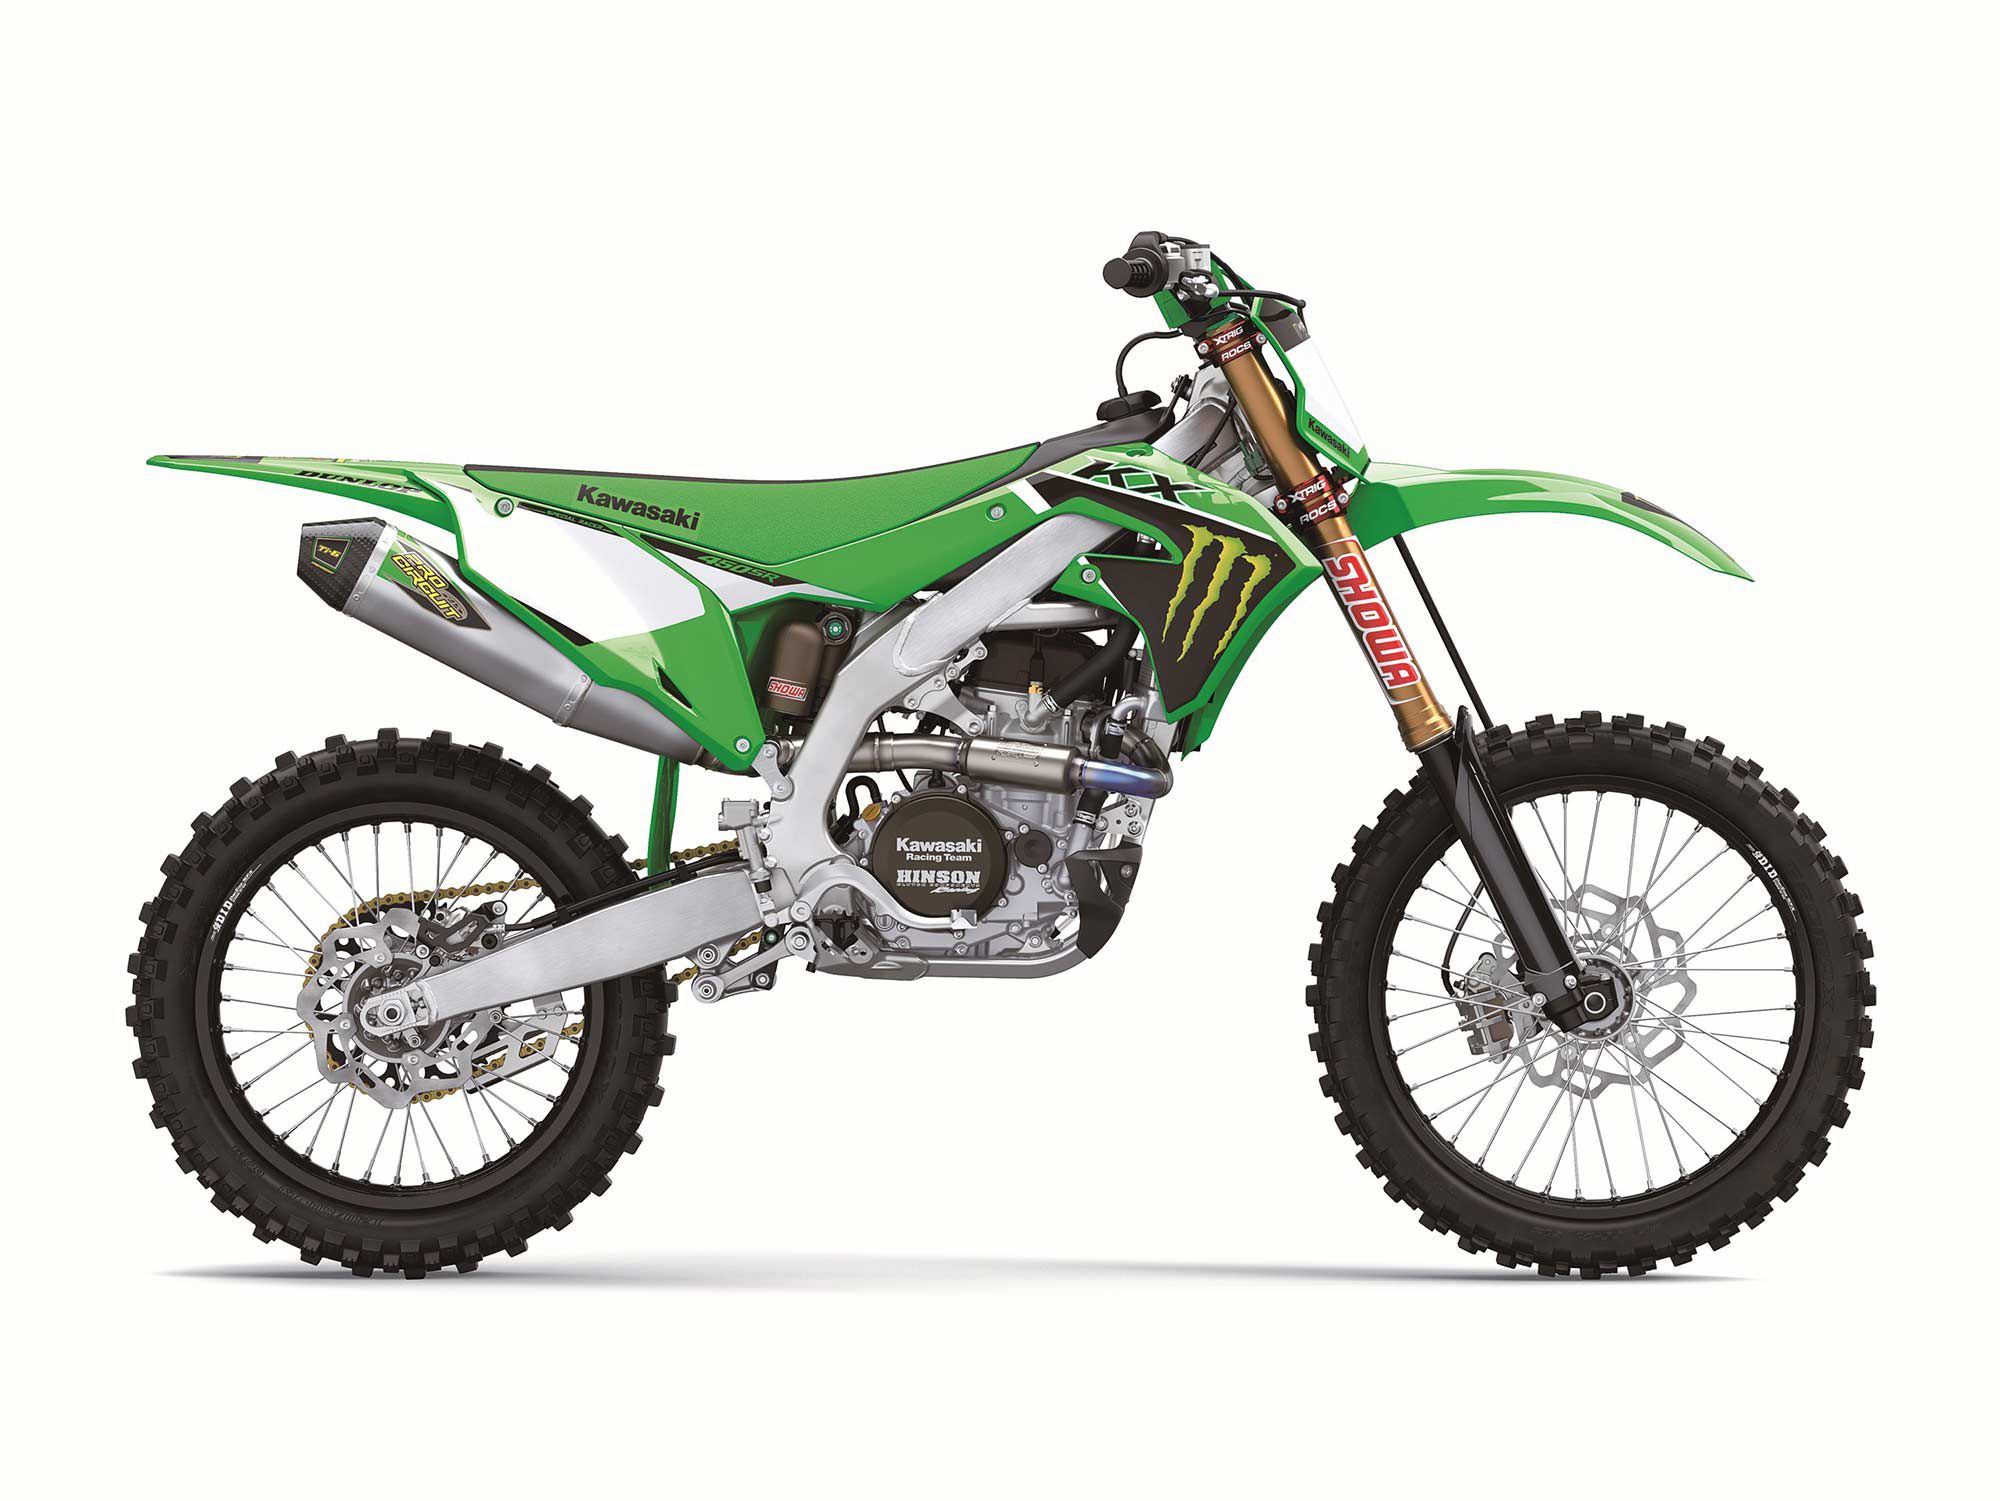 Graphics, engine upgrades, DID rims, and other details separate the SR from the KX450.